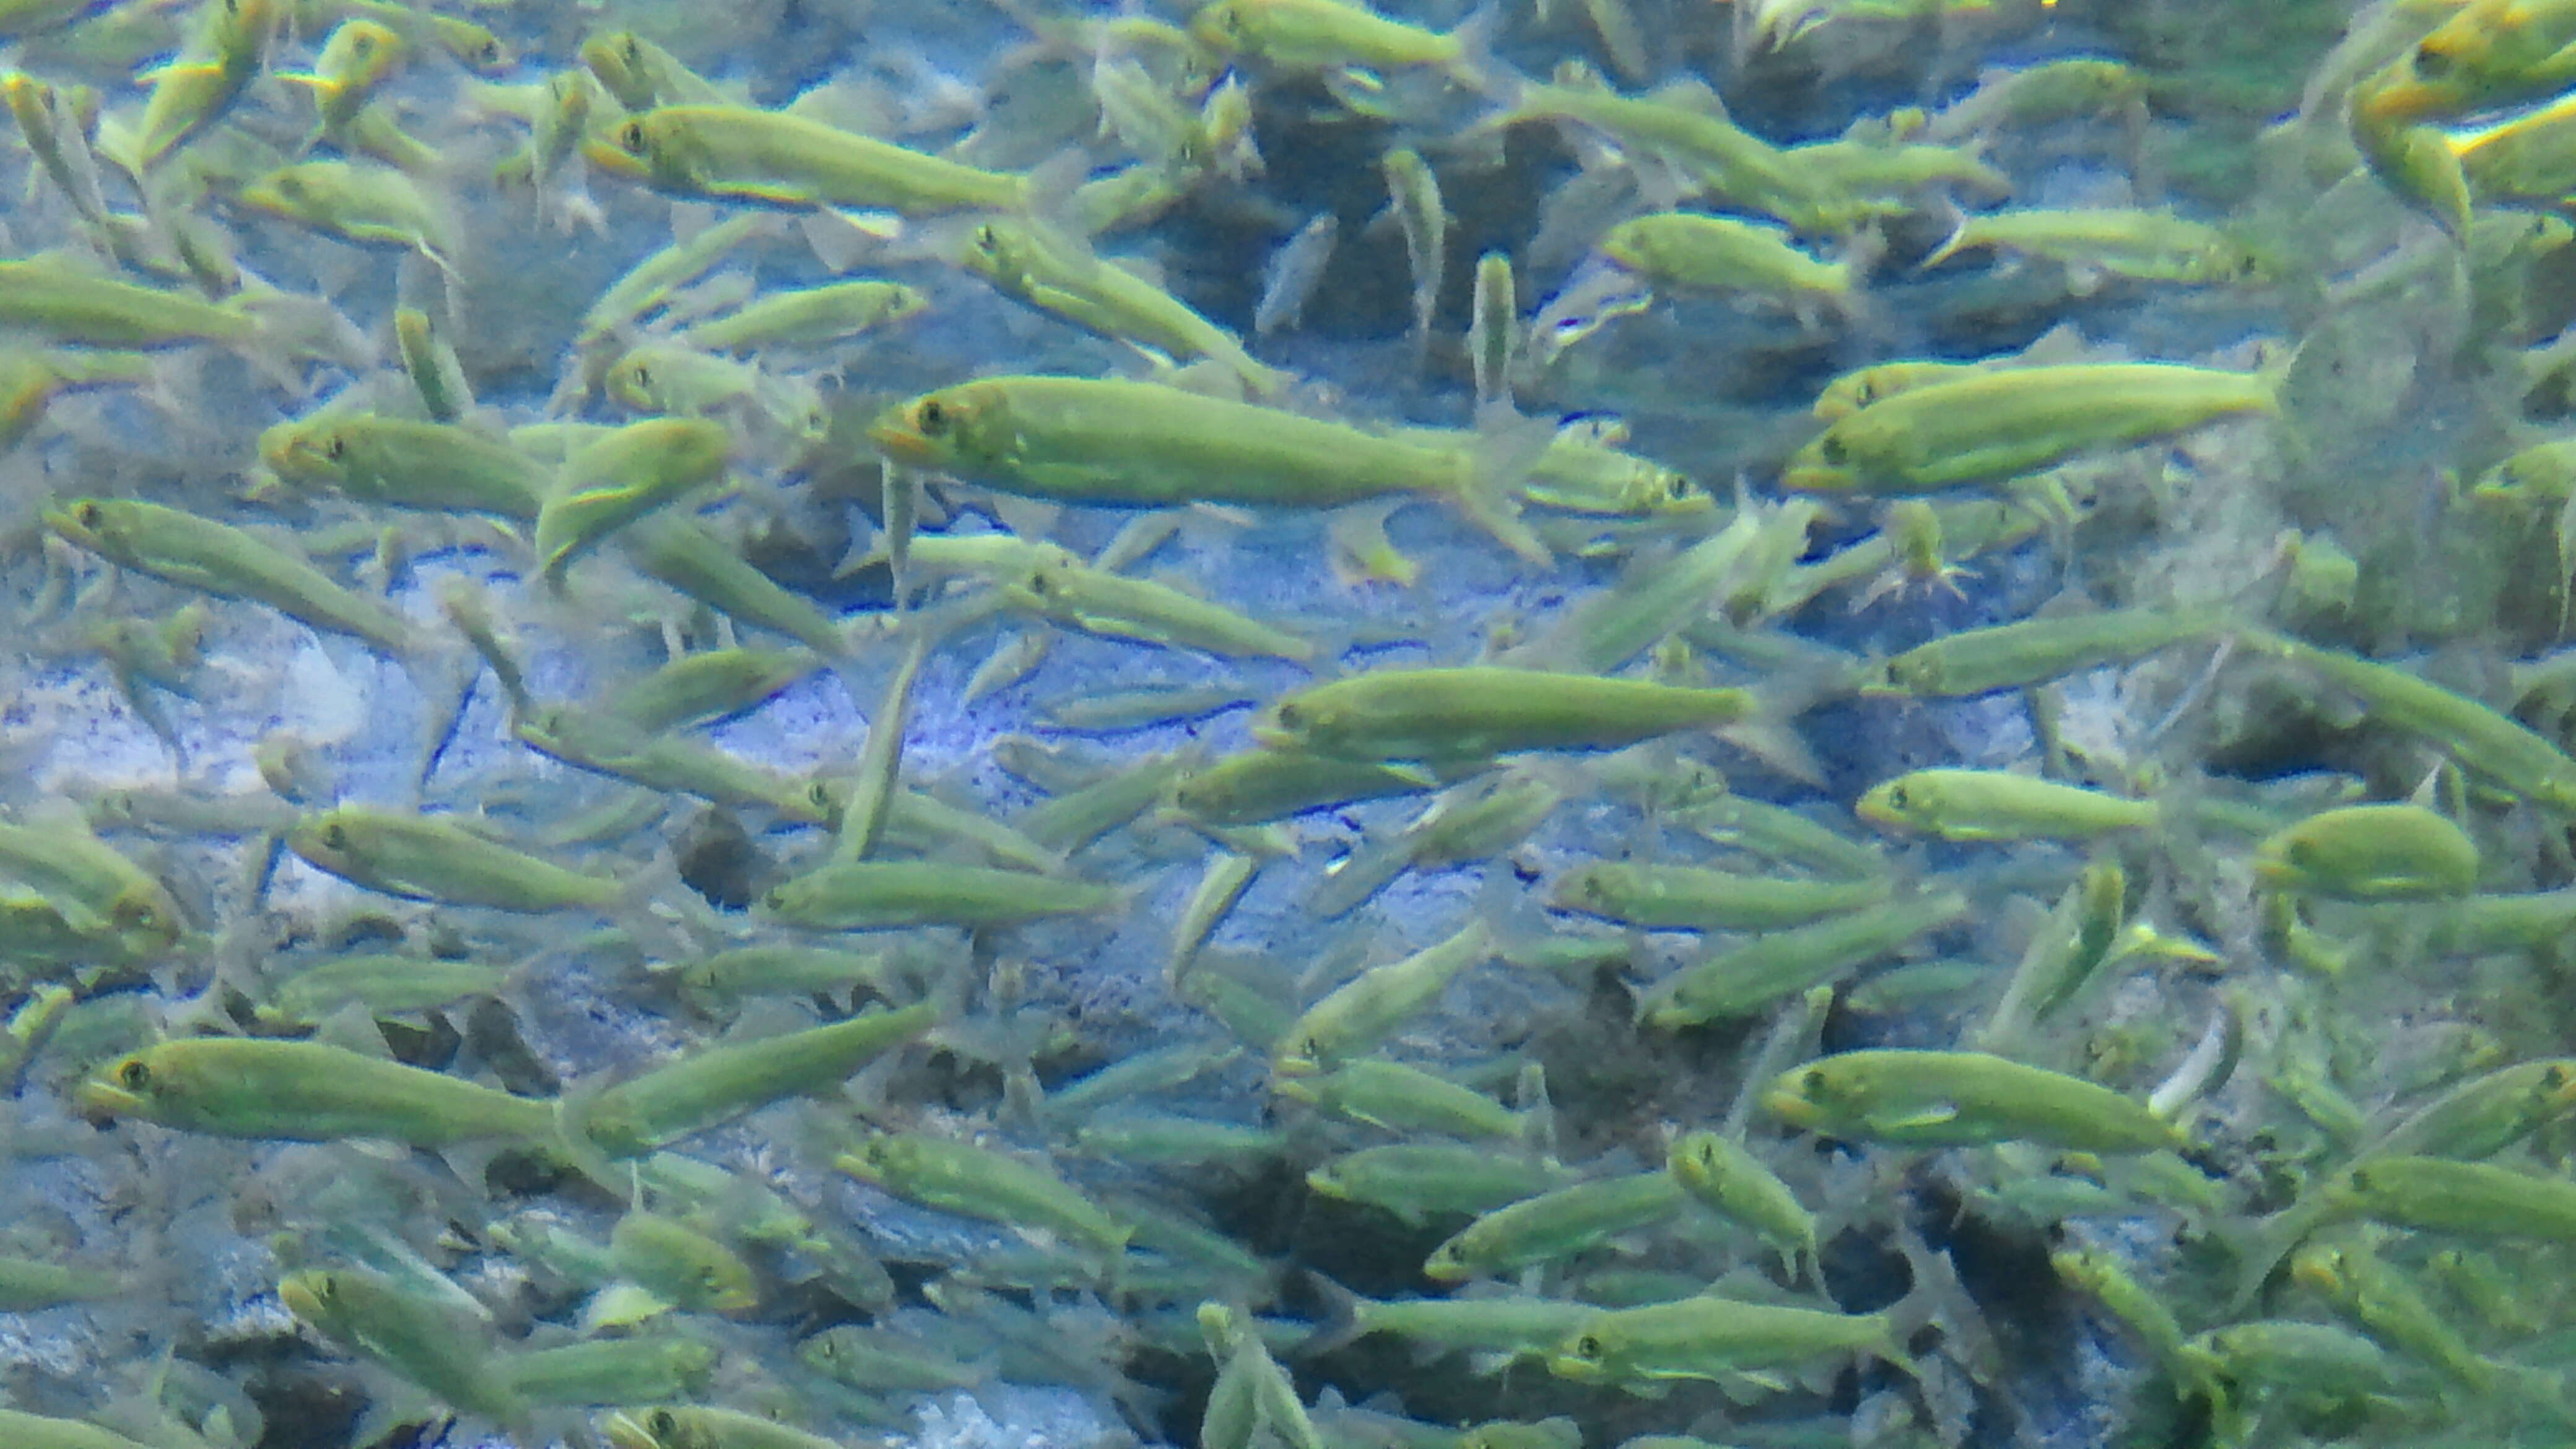 Image of ayu fishes